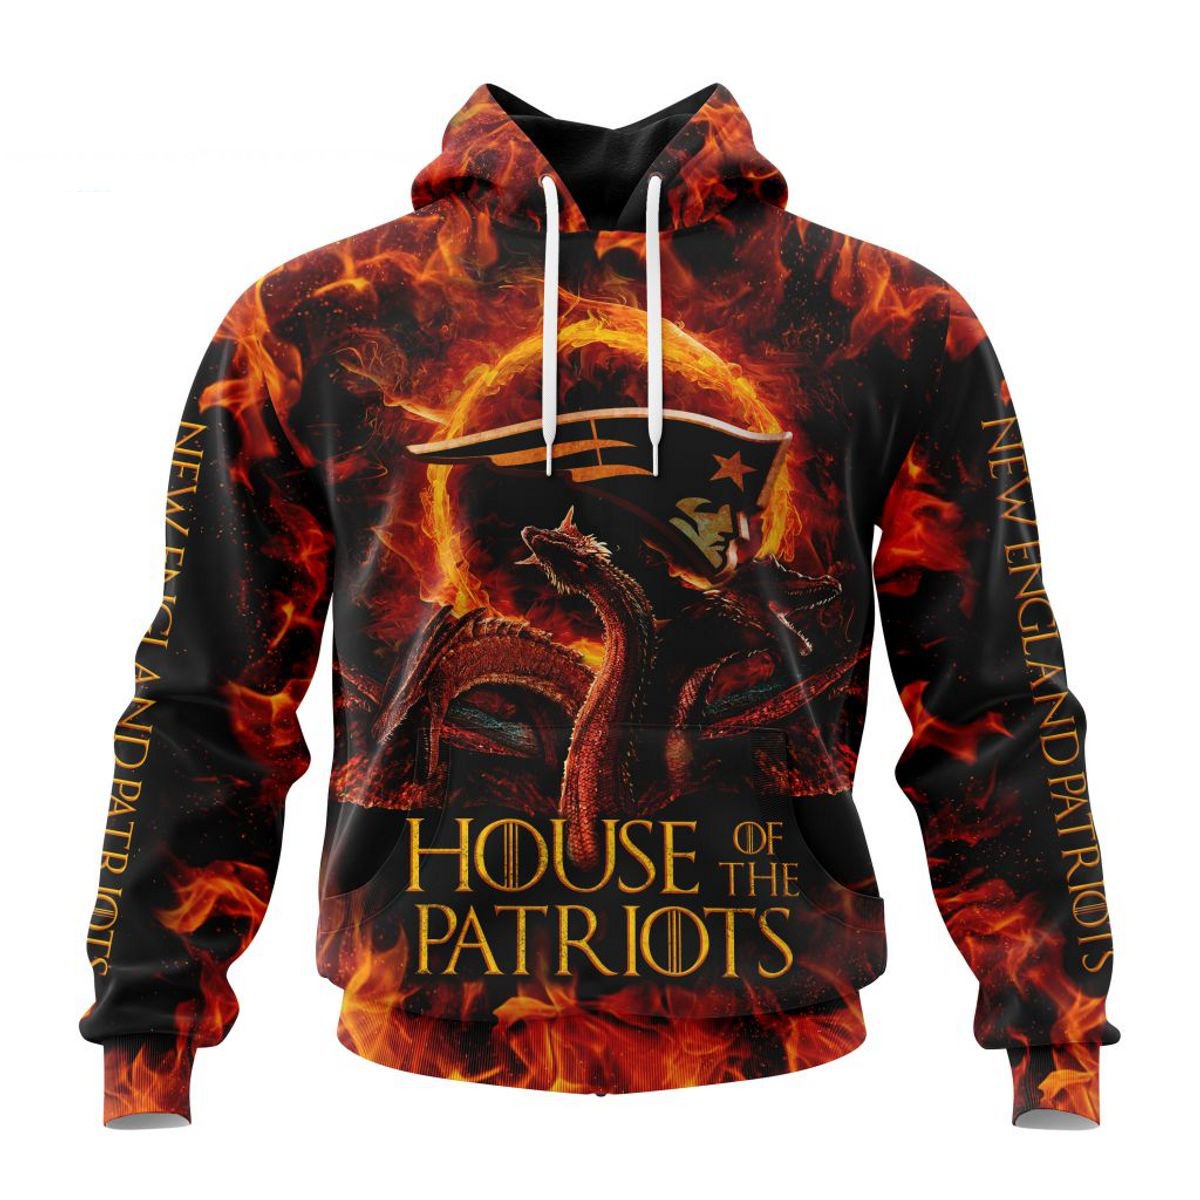 NEW ENGLAND PATRIOTS GAME OF THRONES – HOUSE OF THE PATRIOTS 3D HOODIE